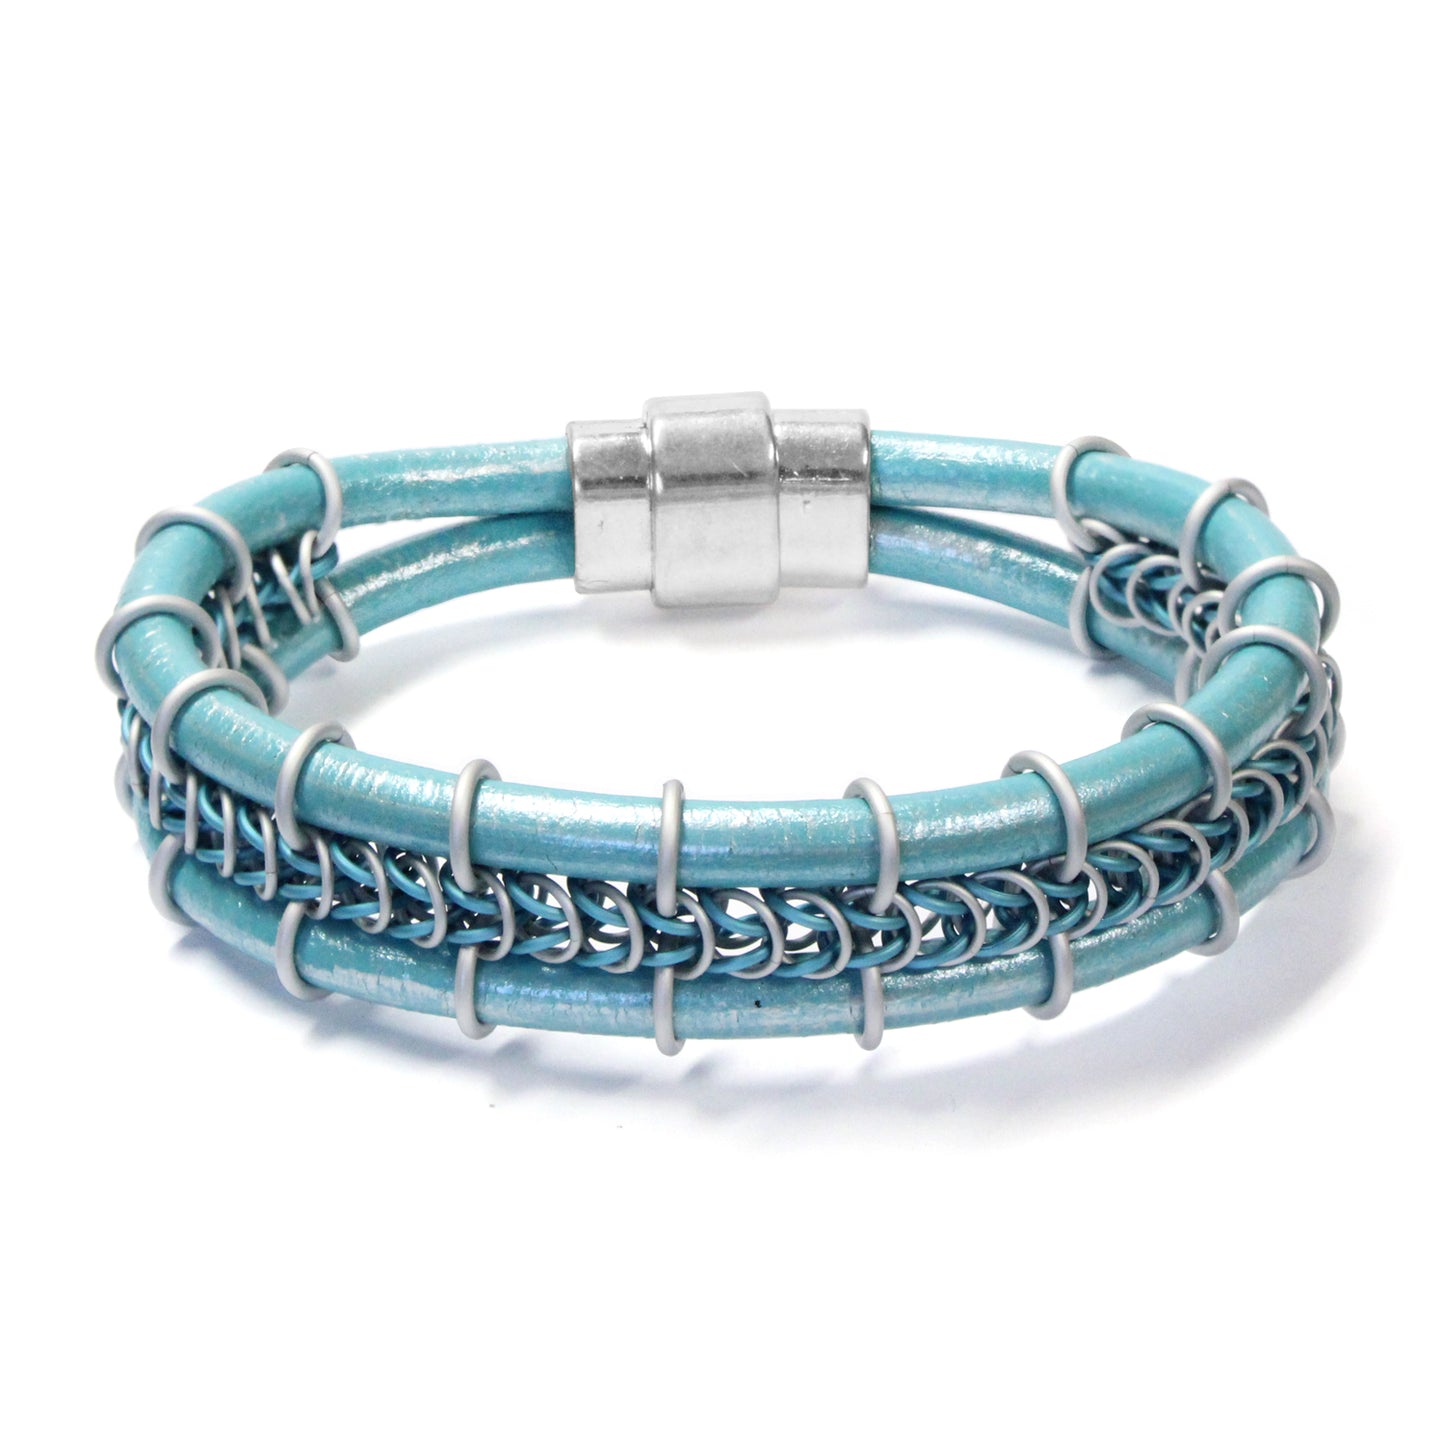 Cord-ially Yours Bracelet / 6.5 to 7 Inch wrist size / matte silver & sky blue chainmail / metallic seafoam leather cord / magnetic clasp